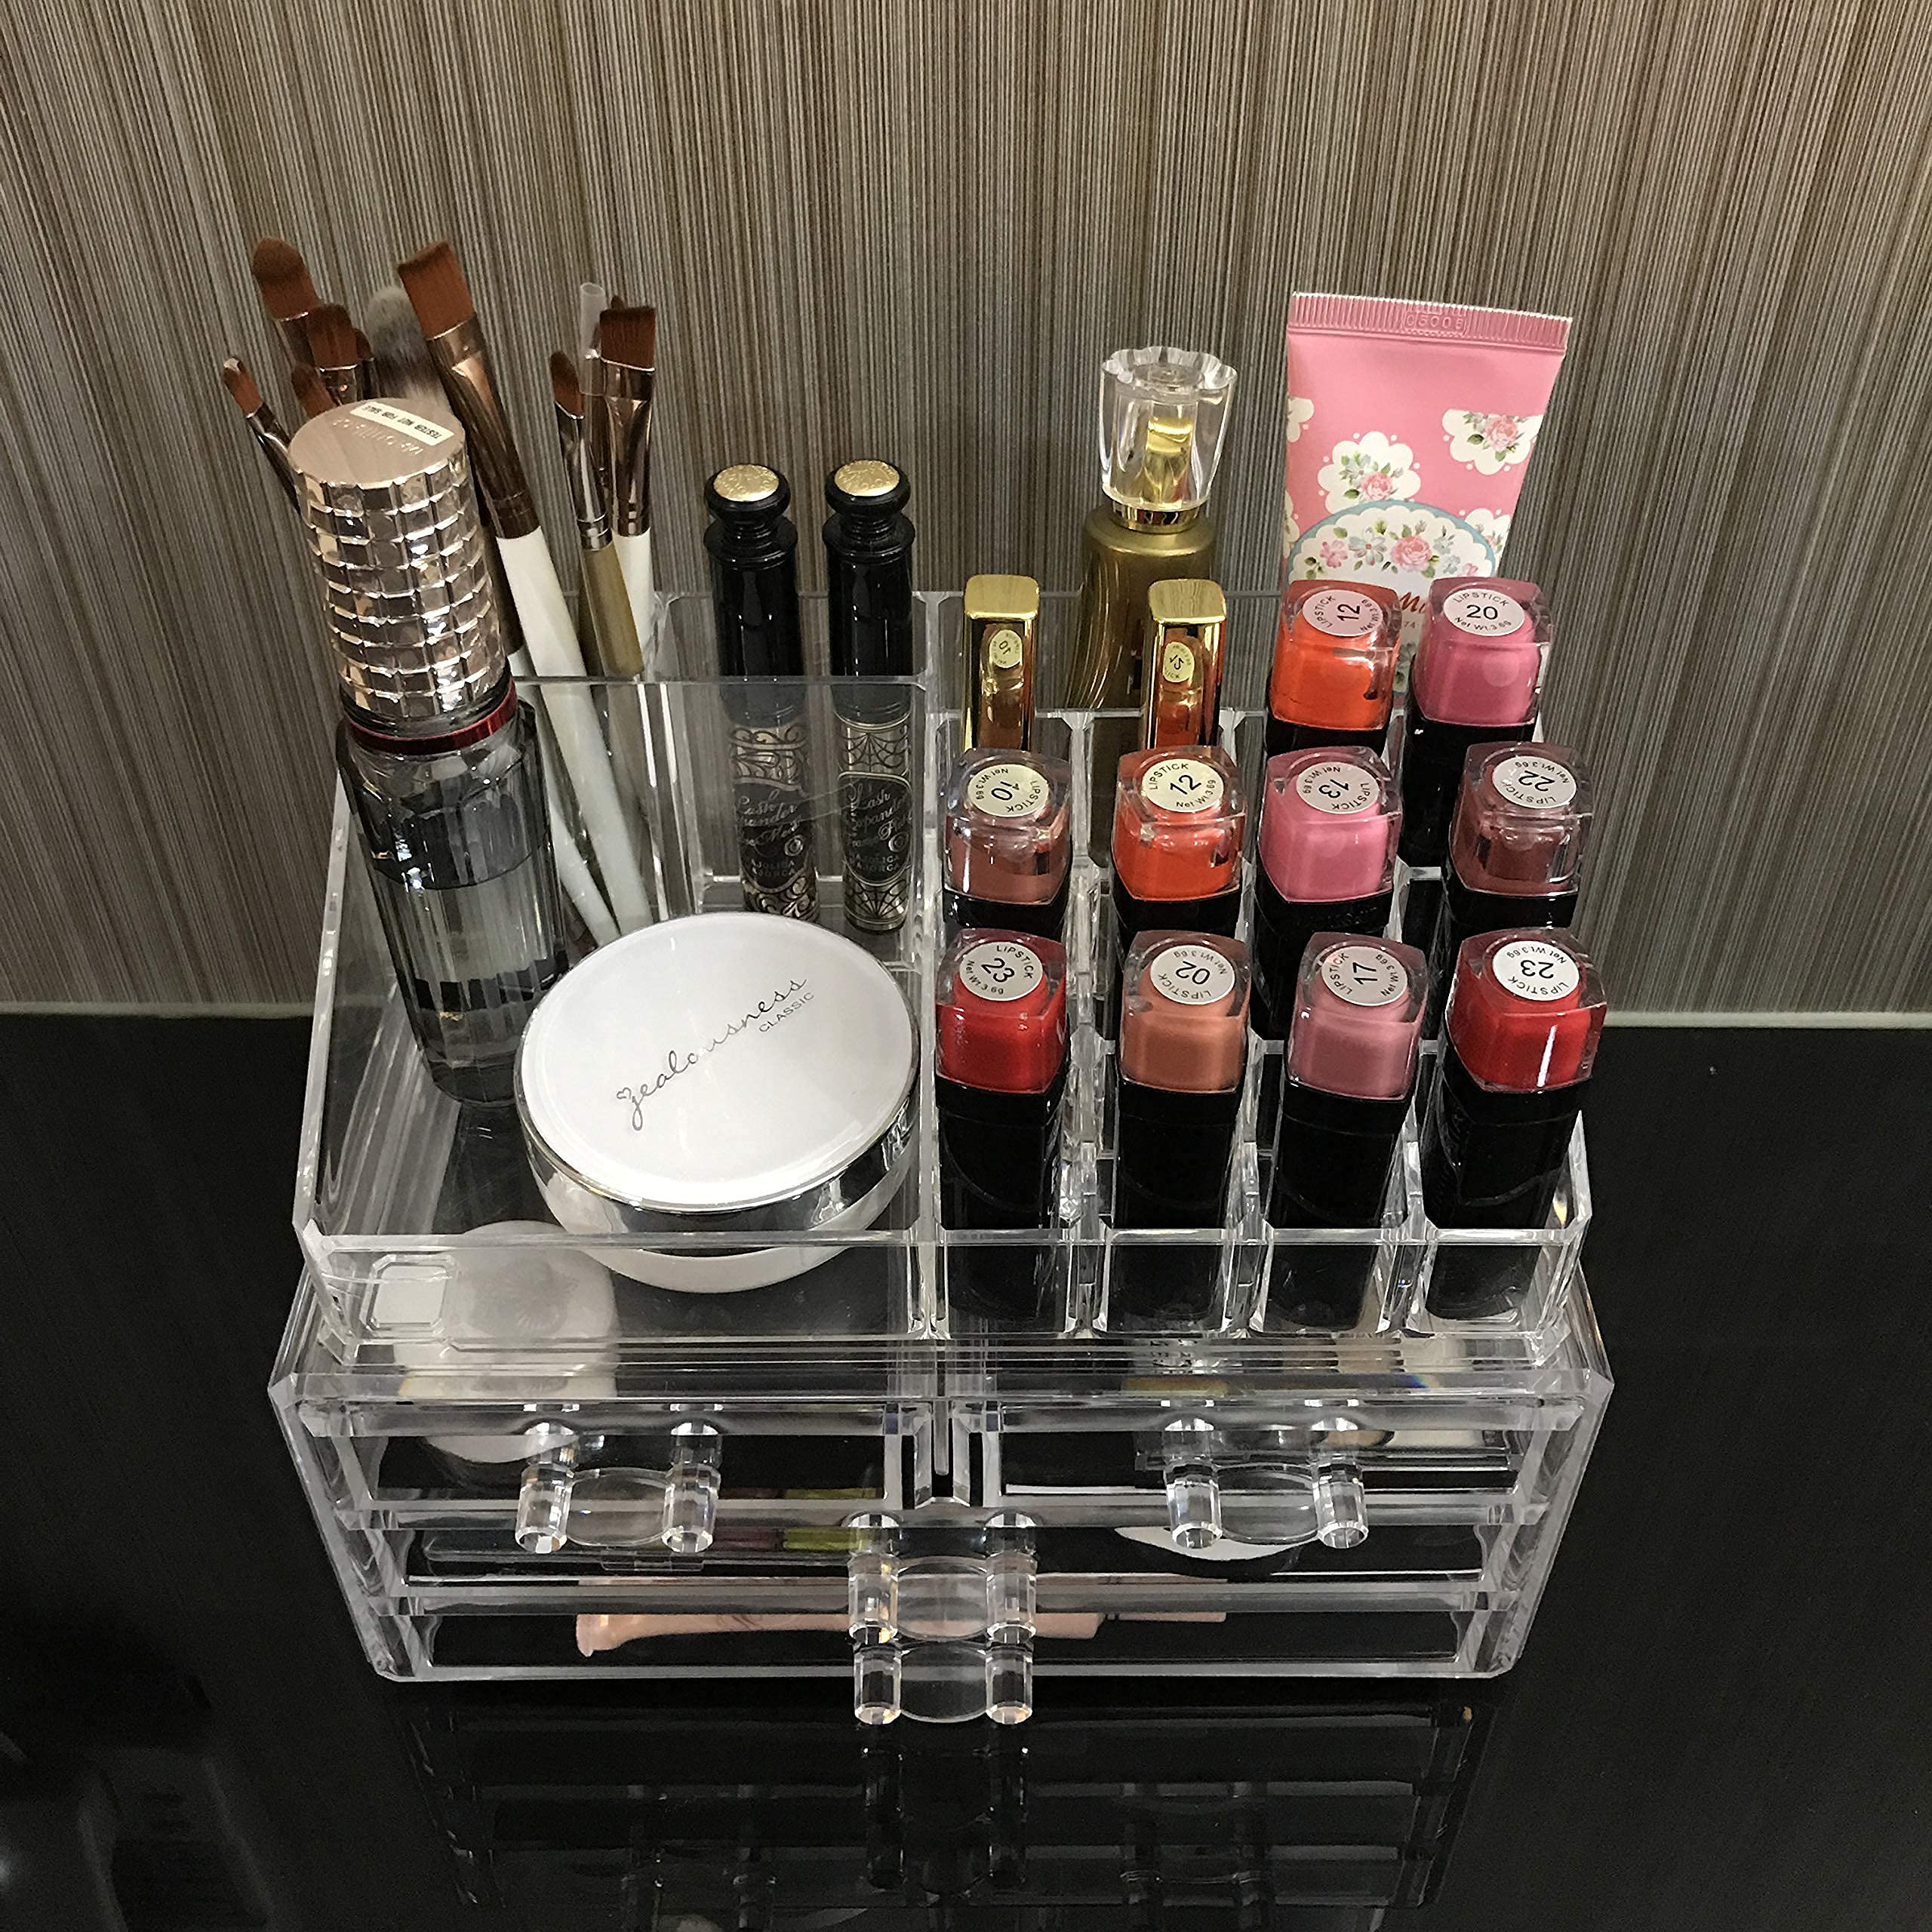 Ikee Design Clear Makeup Organizer for Vanity, Bathroom Counter or Dresser - Easily Accessible with Clear Design. Perfectly Organize Your Beauty Essentials. Adds an Elegant Touch to Your Space.